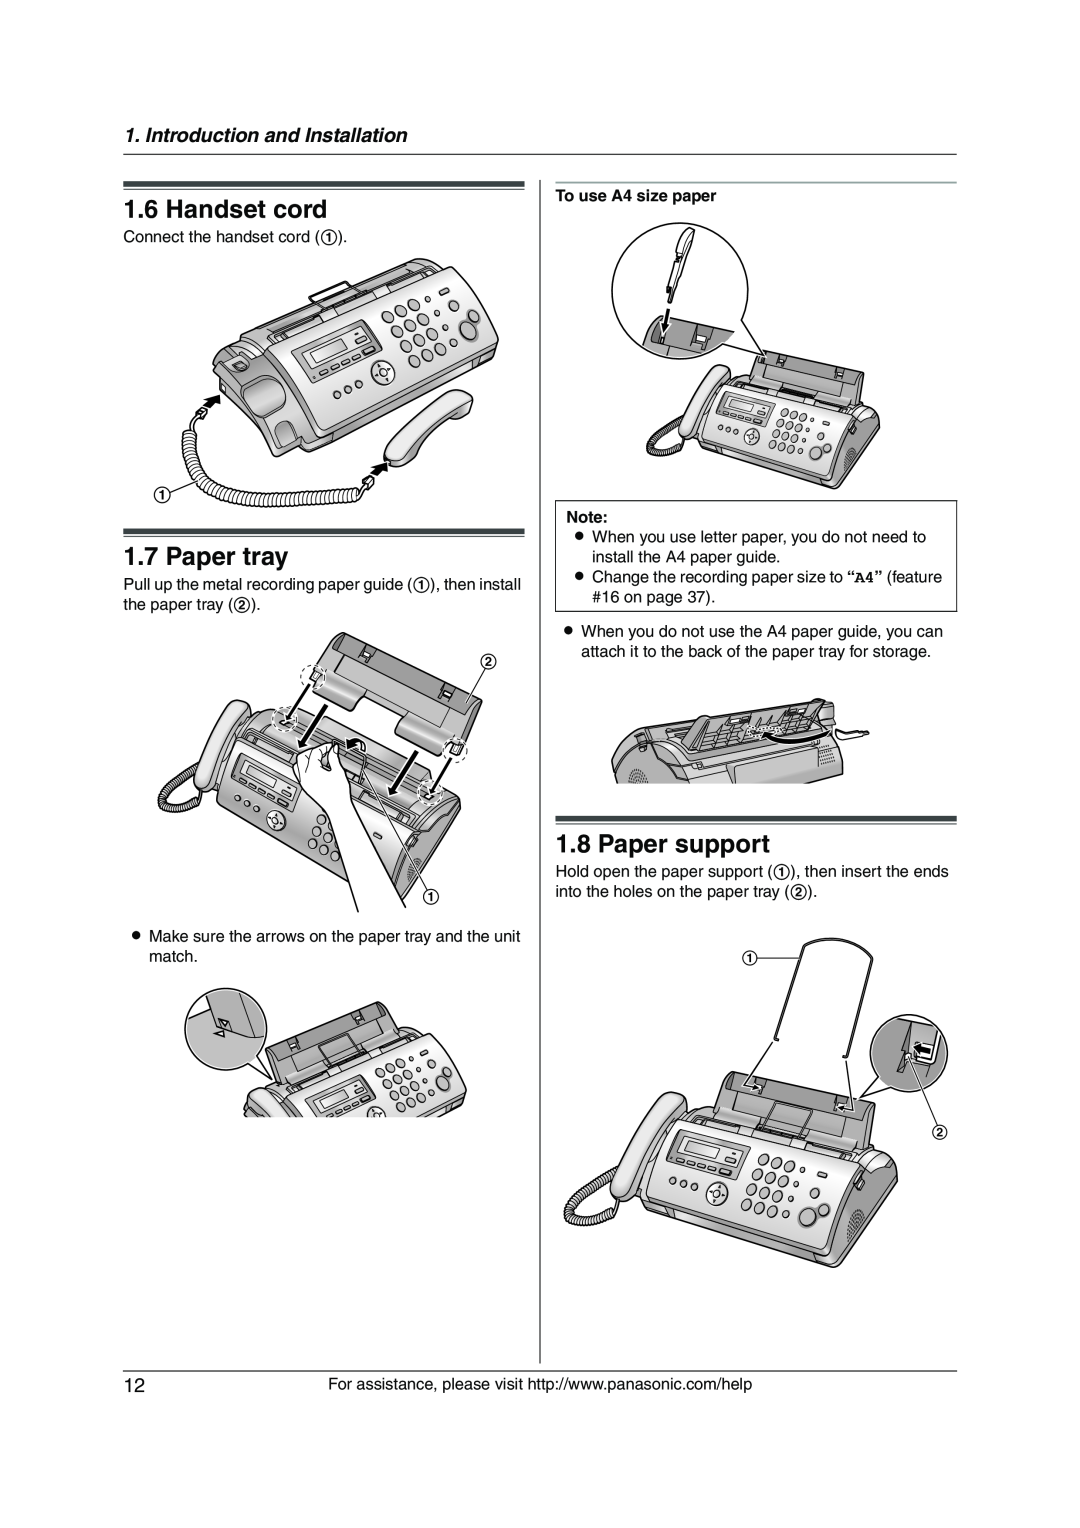 Panasonic KX-FP215 Handset cord, Paper tray, Paper support, Introduction and Installation, To use A4 size paper 